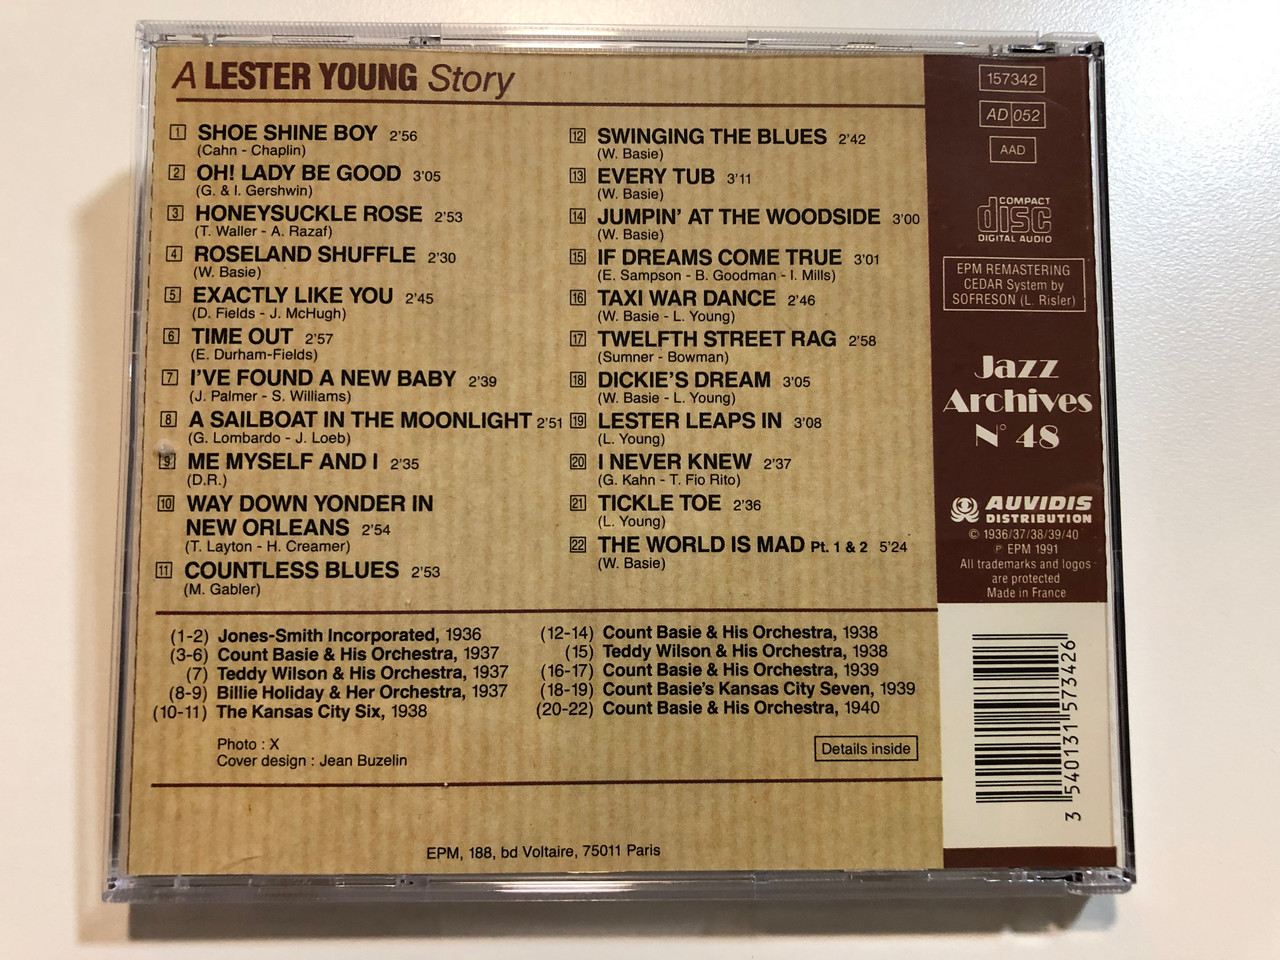 https://cdn10.bigcommerce.com/s-62bdpkt7pb/products/29359/images/175128/Lester_Young_A_Lester_Young_Story_Featuring_Count_Basie_Orchestra_Teddy_Wilson_Billie_Holiday_19361940_Jazz_Archives_Audio_CD_1991_N_48_5__21321.1618423505.1280.1280.JPG?c=2&_ga=2.119435789.543434869.1618406858-6505287.1618406858